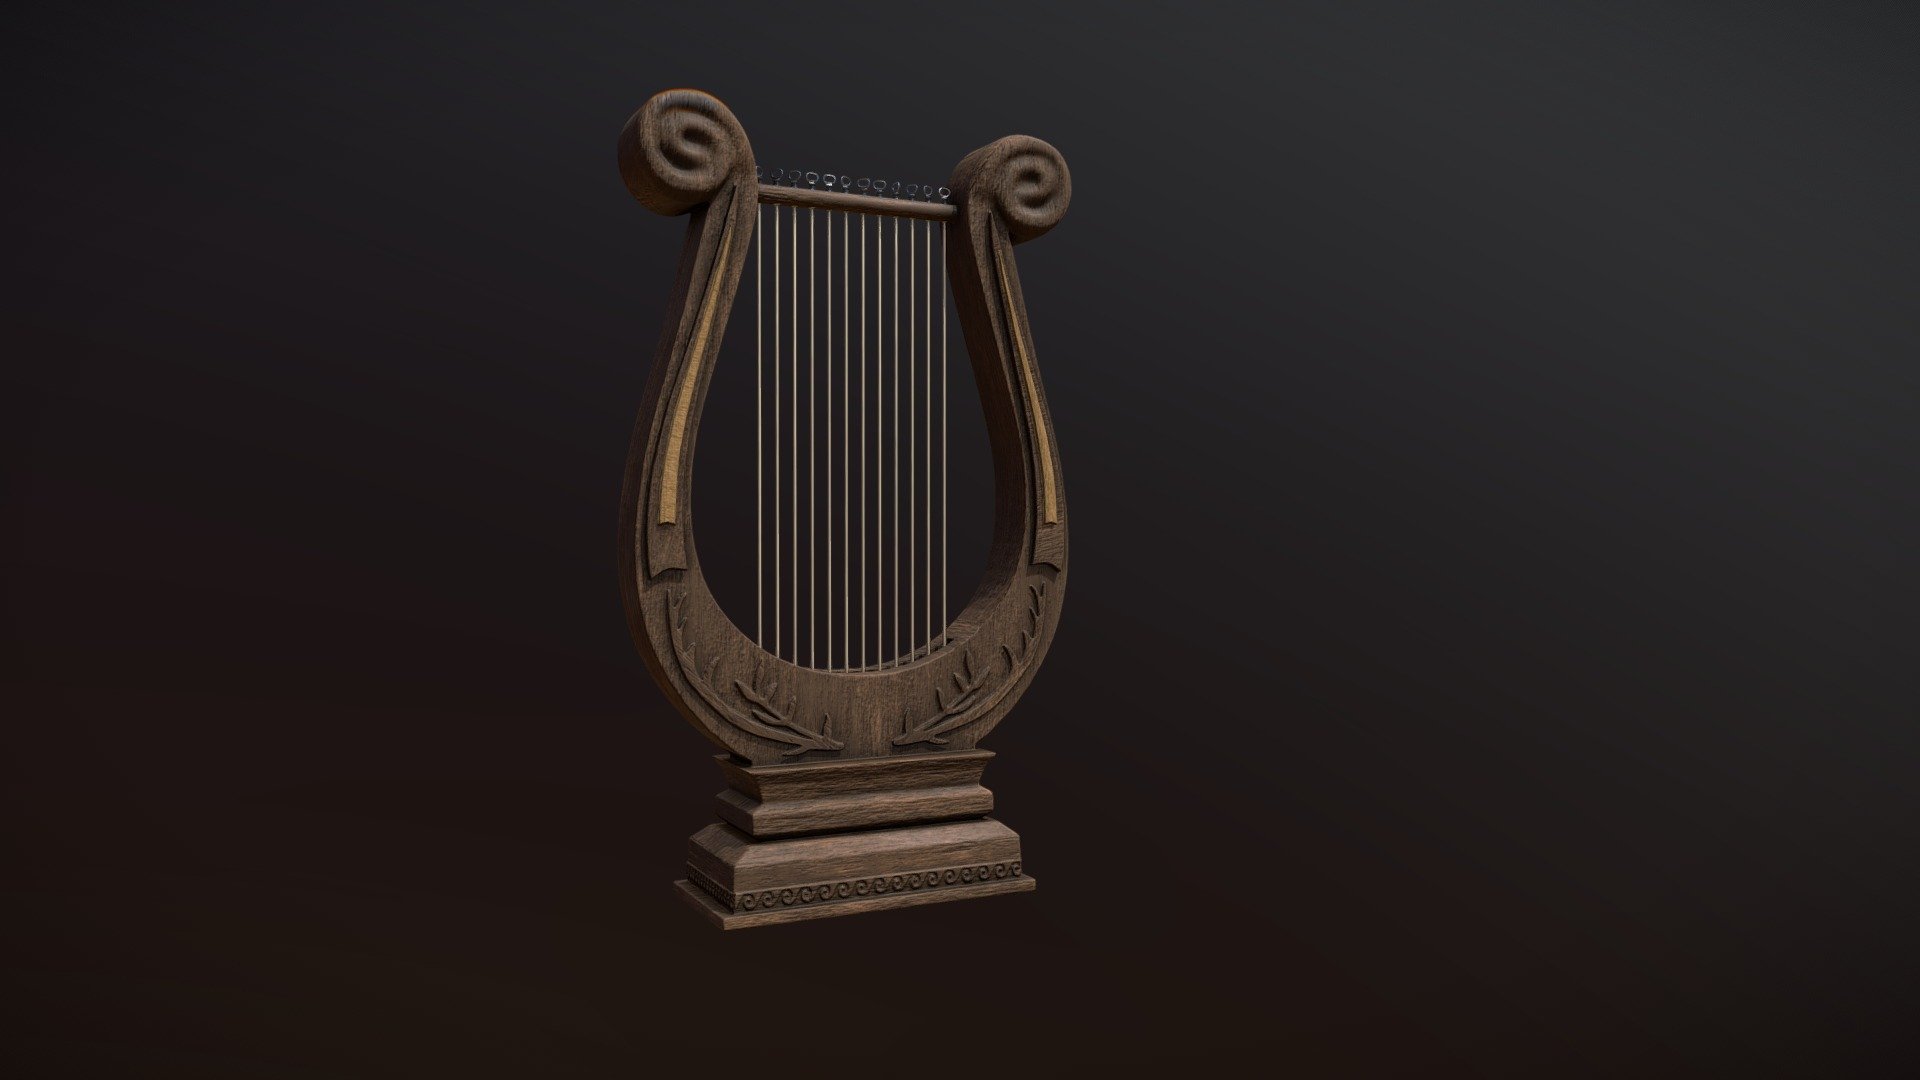 This is game ready asset made almost fully in Houdini. 
Ornaments done in Houdini as well.

My Arstation - https://www.artstation.com/zdmit - Greek Lyre - Download Free 3D model by dimitryzub 3d model